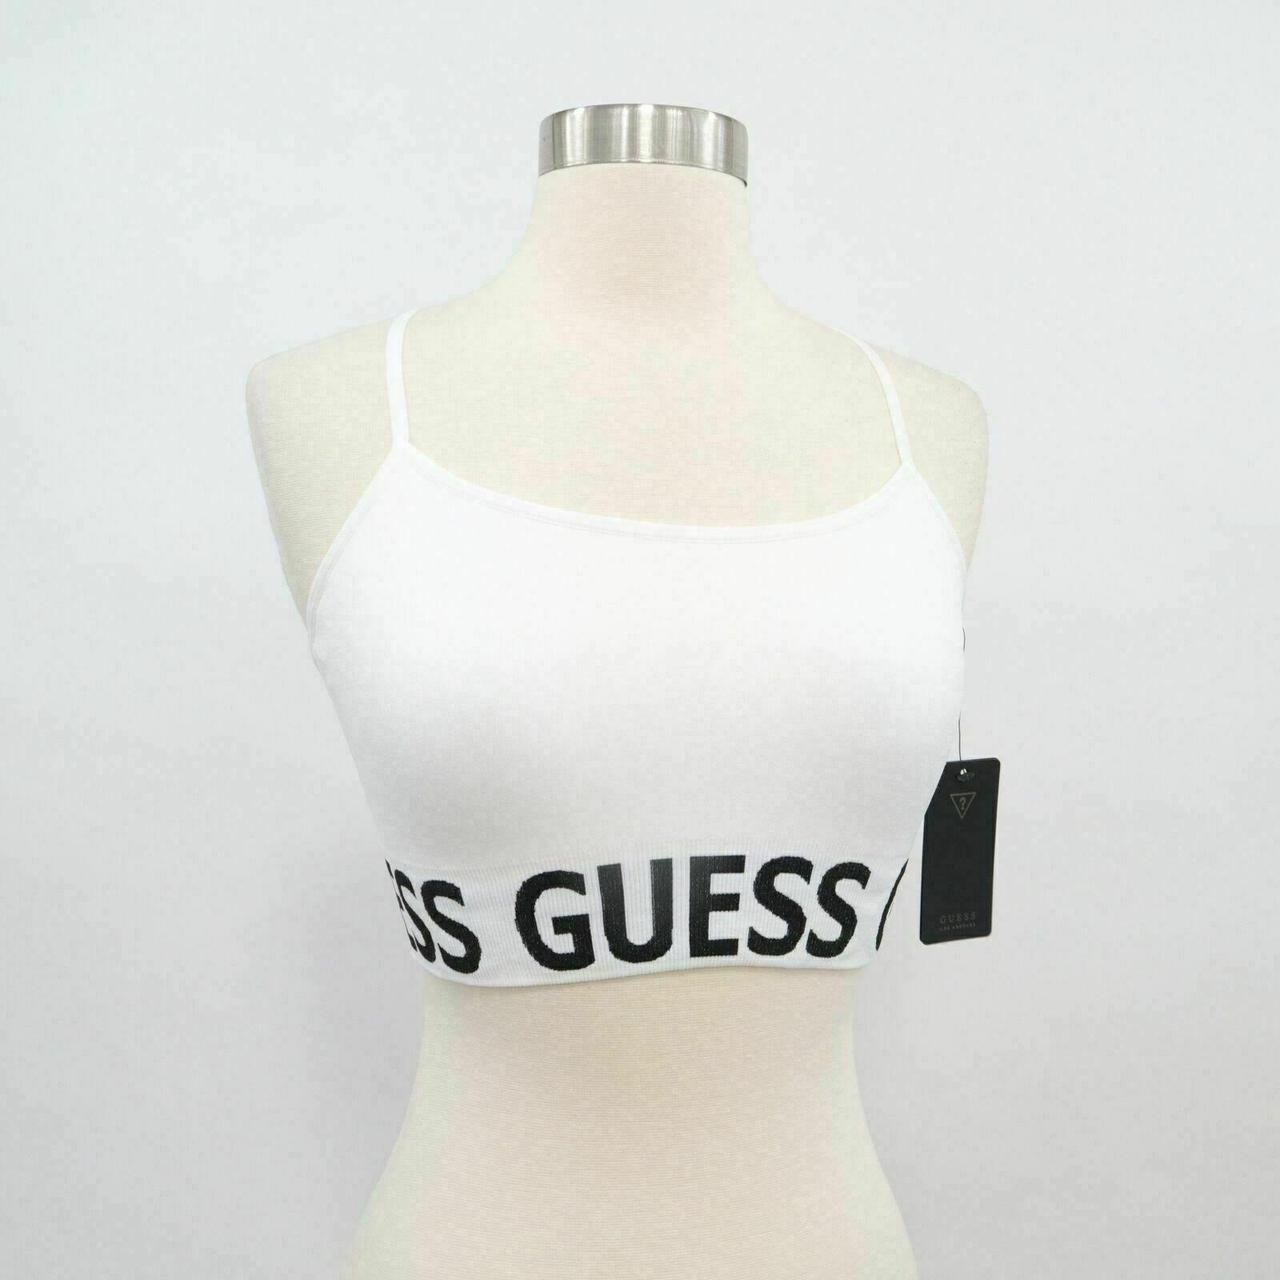 Guess Women's White Vests-tanks-camis (3)